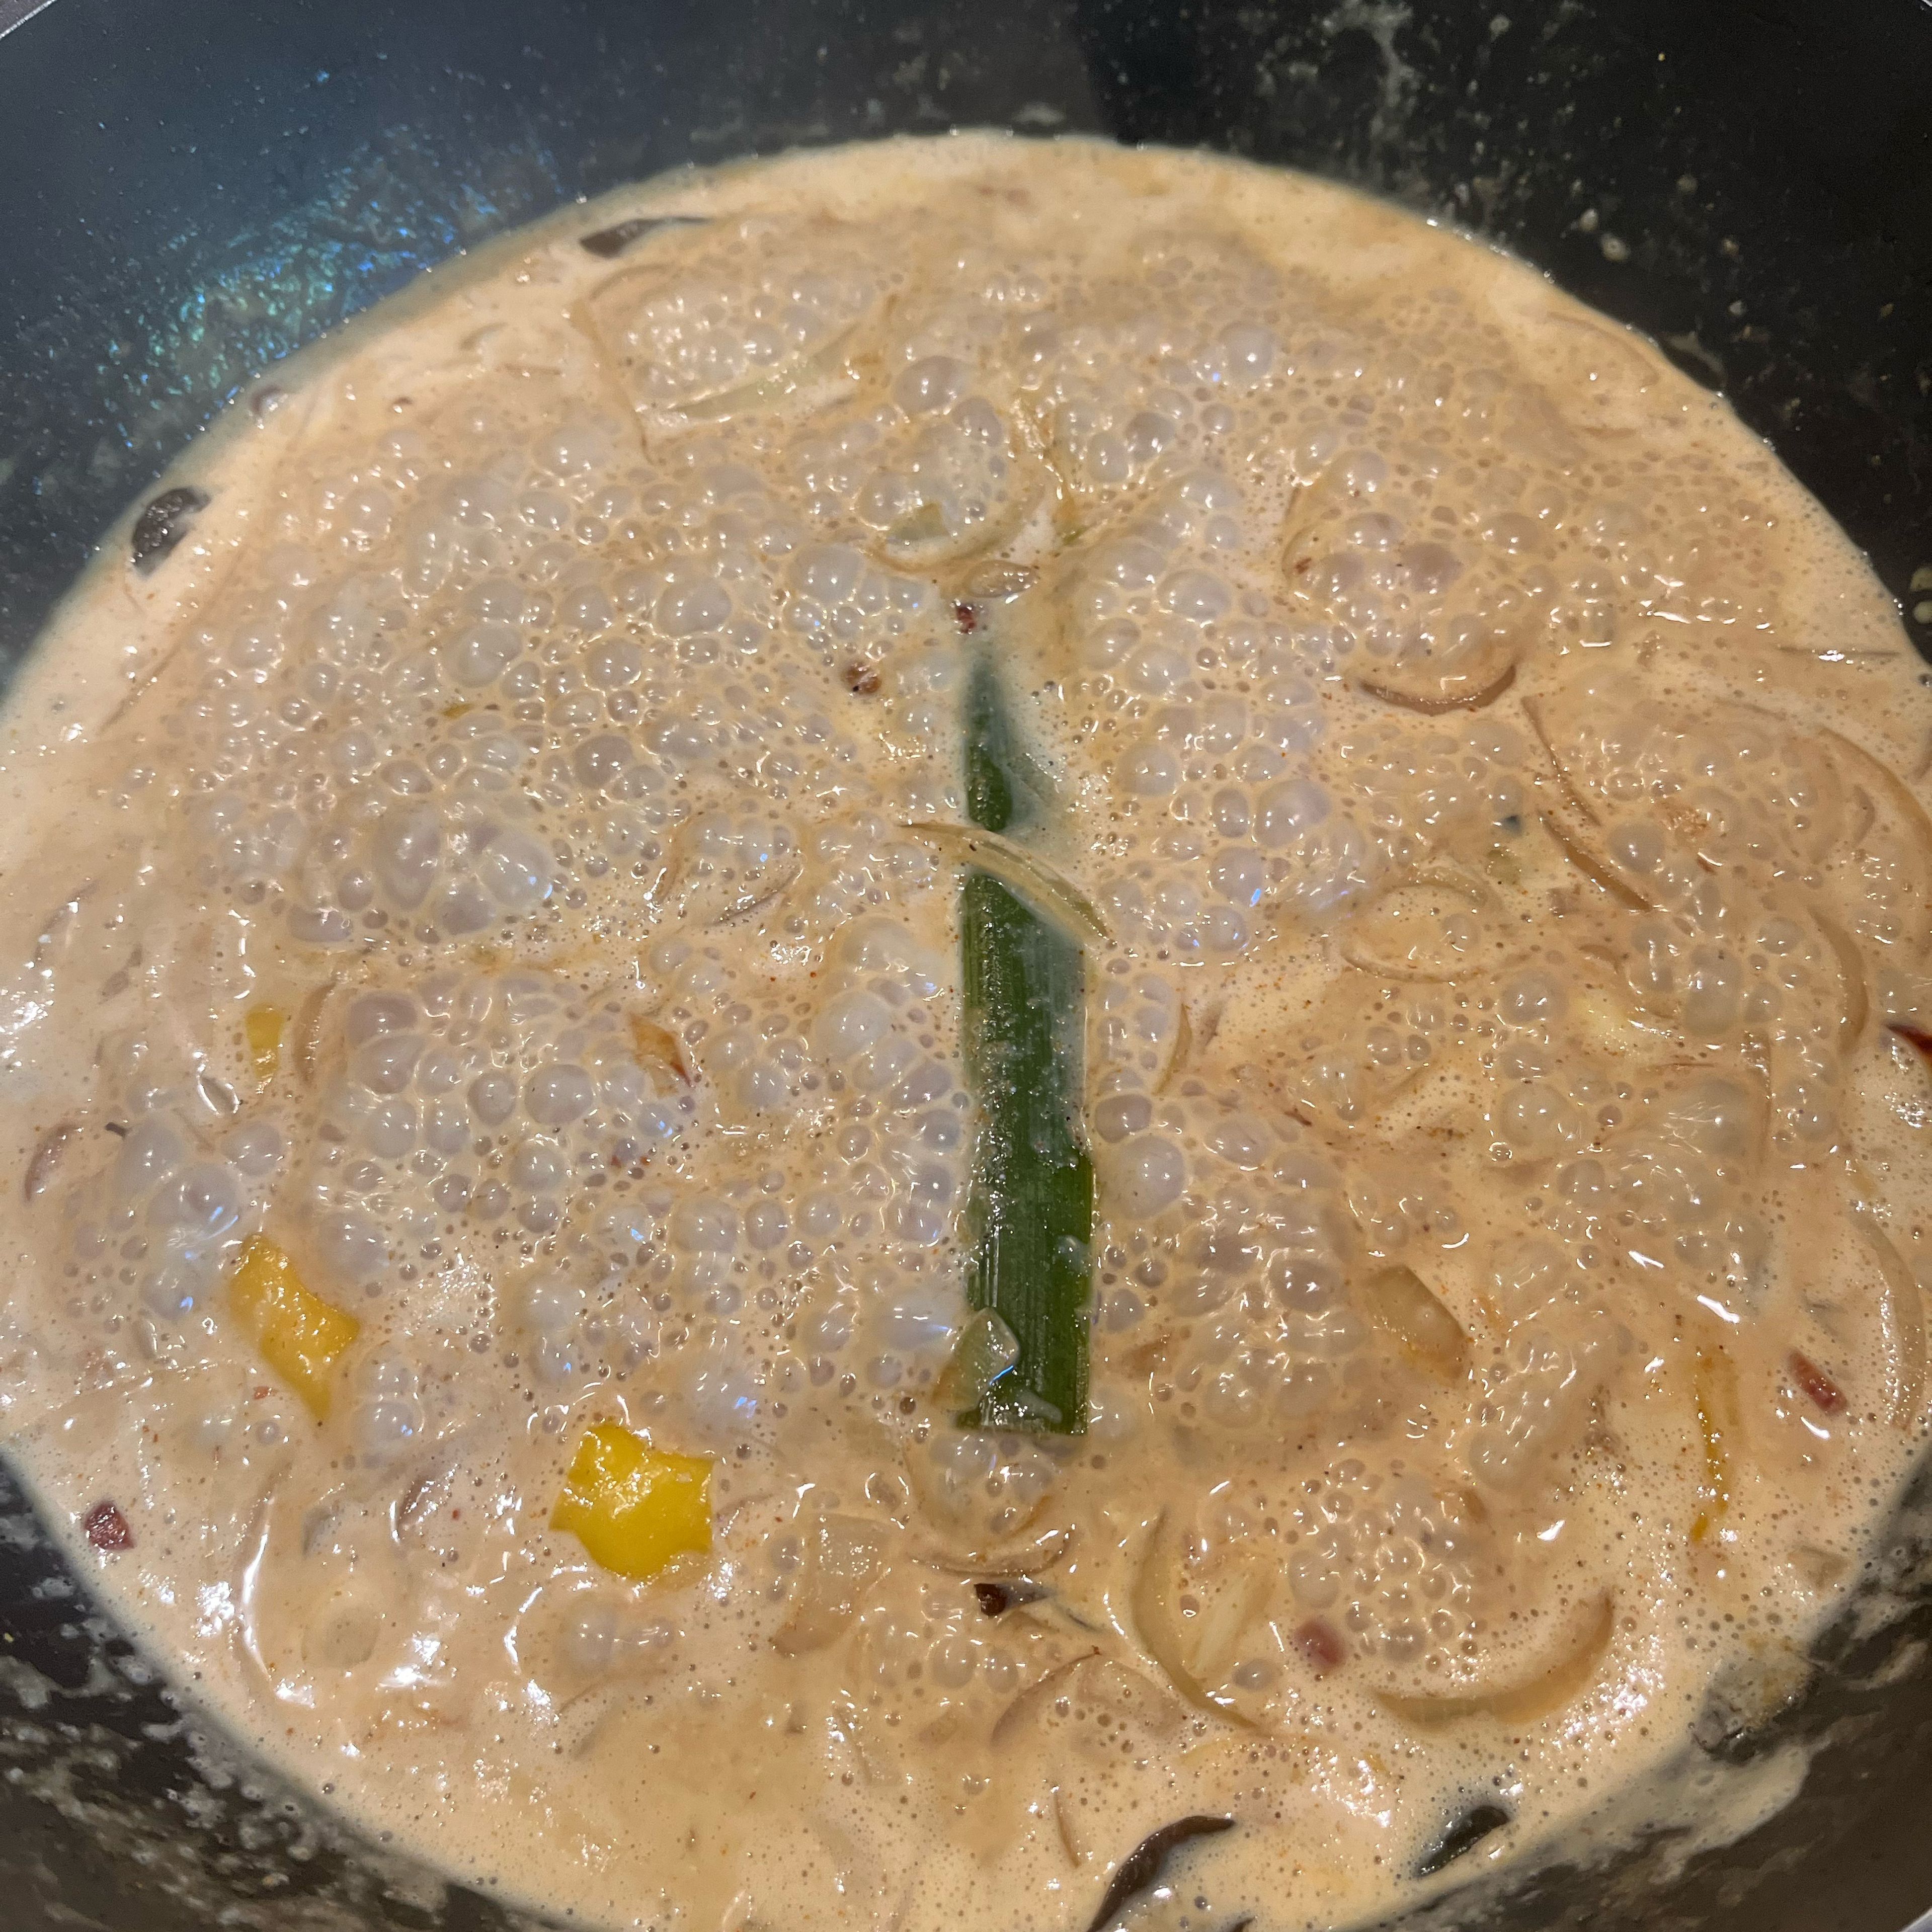 Fry onion with curry leaves and pandan leaf 1-2 min. Add ginger, garlic, chili pepper, cayenne pepper and curry powder. Stir fry for 2-3 min. At last add tamarind paste and coconut milk, and simmer gravy until thick.